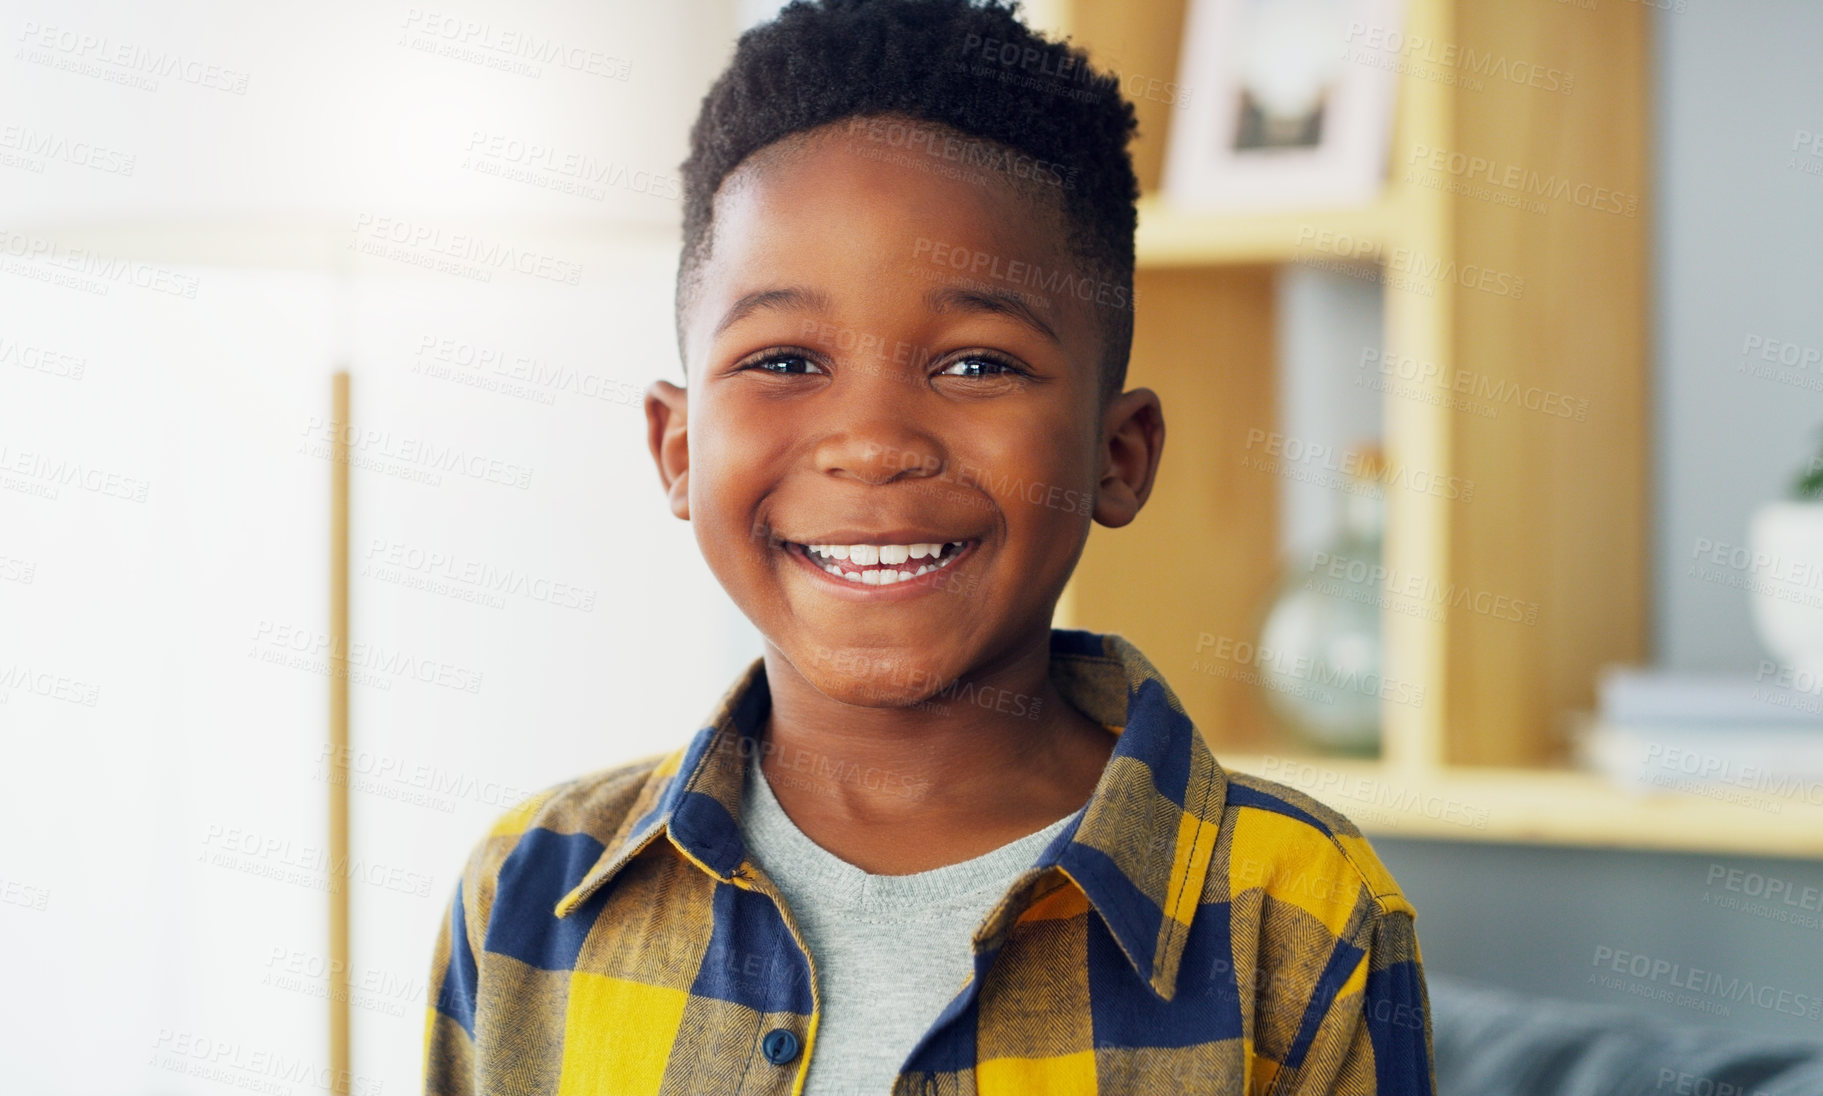 Buy stock photo Portrait of an adorable little boy smiling and feeling cheerful at home